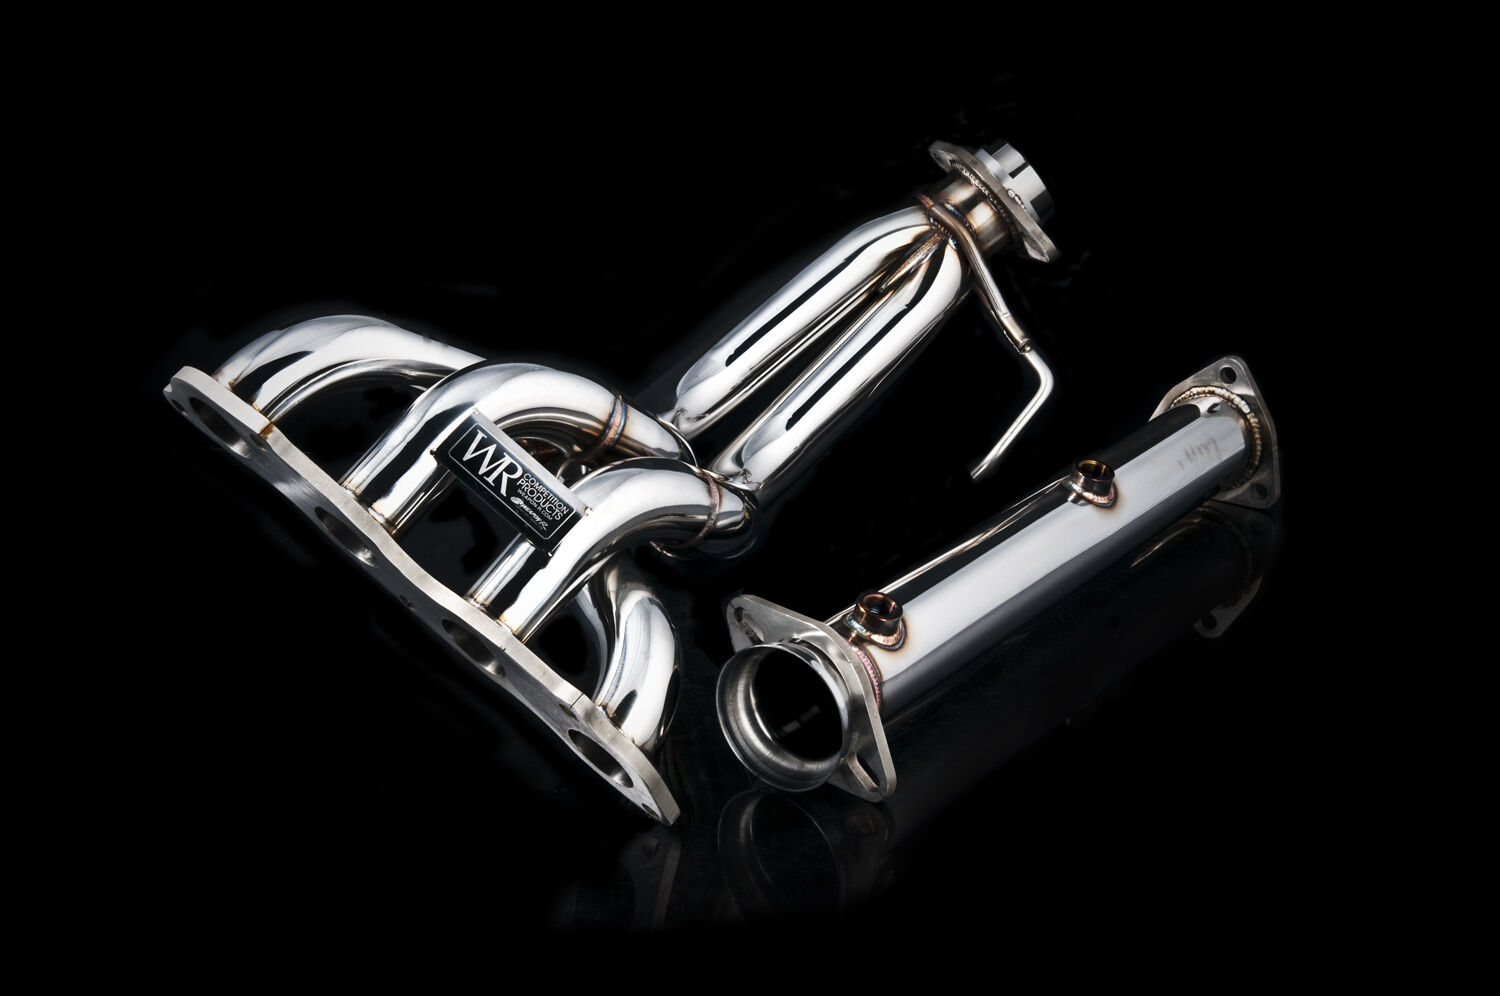 WEAPON-R SS RACE HEADER EXHAUST FOR 04-05 HONDA ACCORD 4CYL